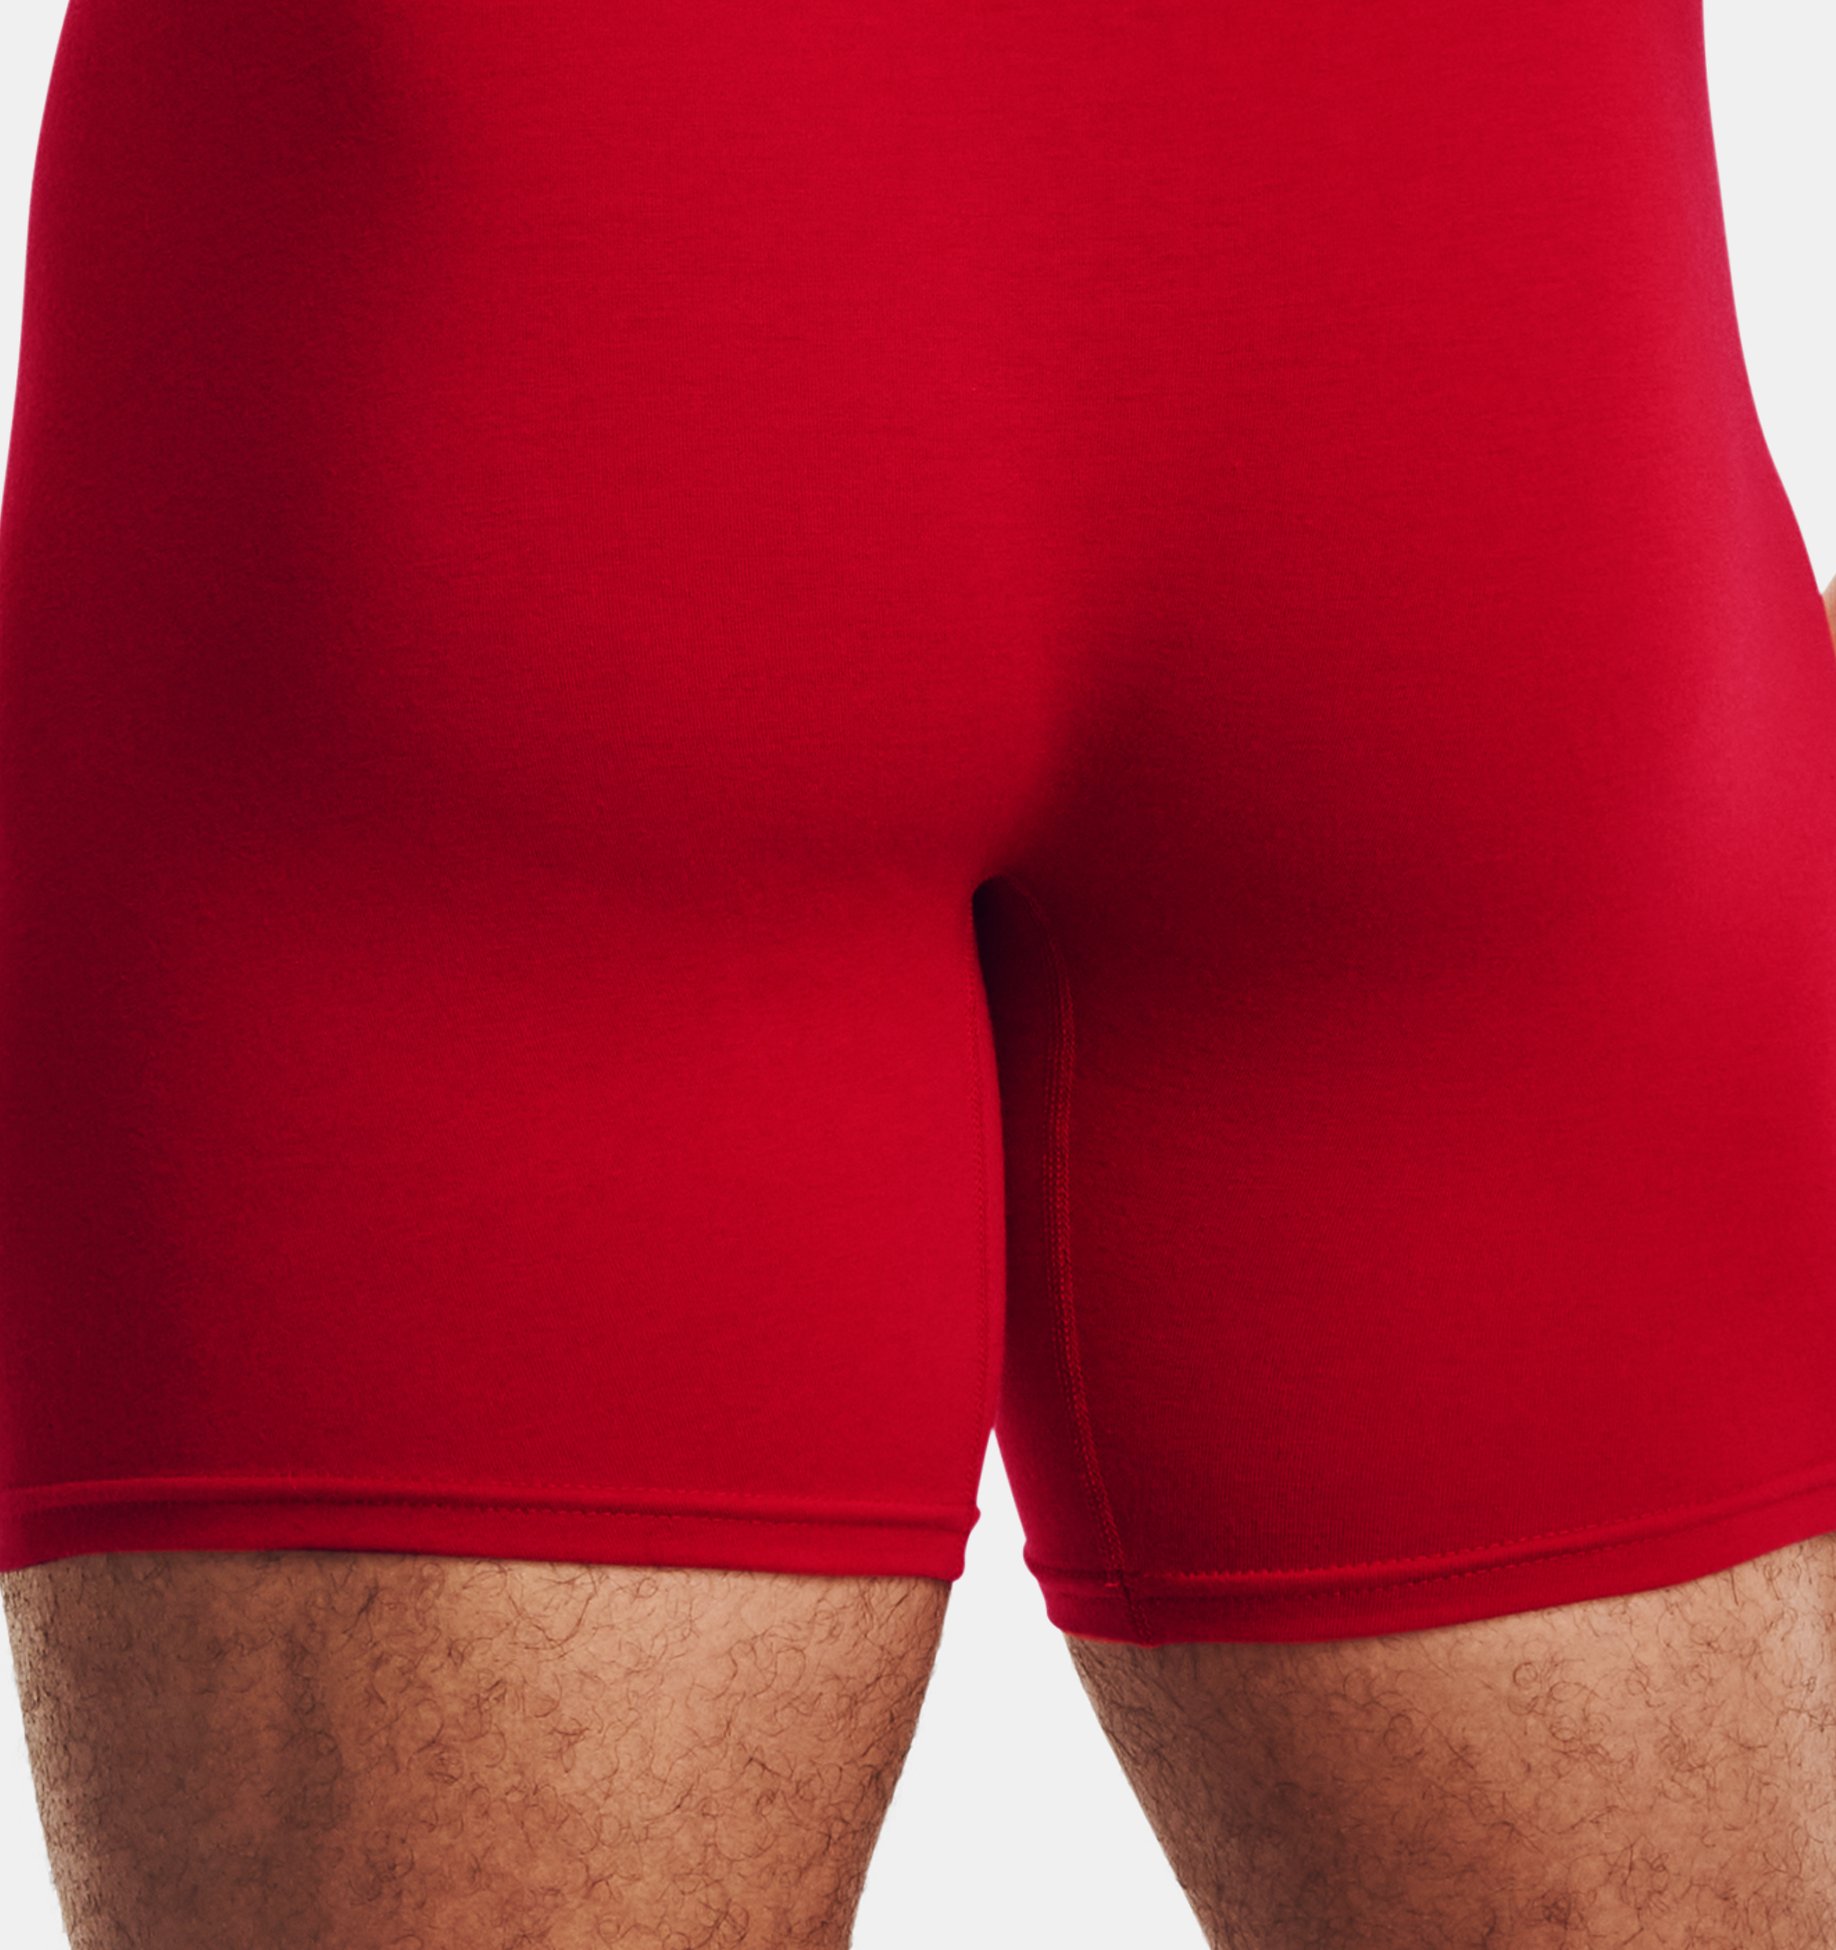 Under Armour Charged Cotton x 3 Men's Sportswear Boxers - Red